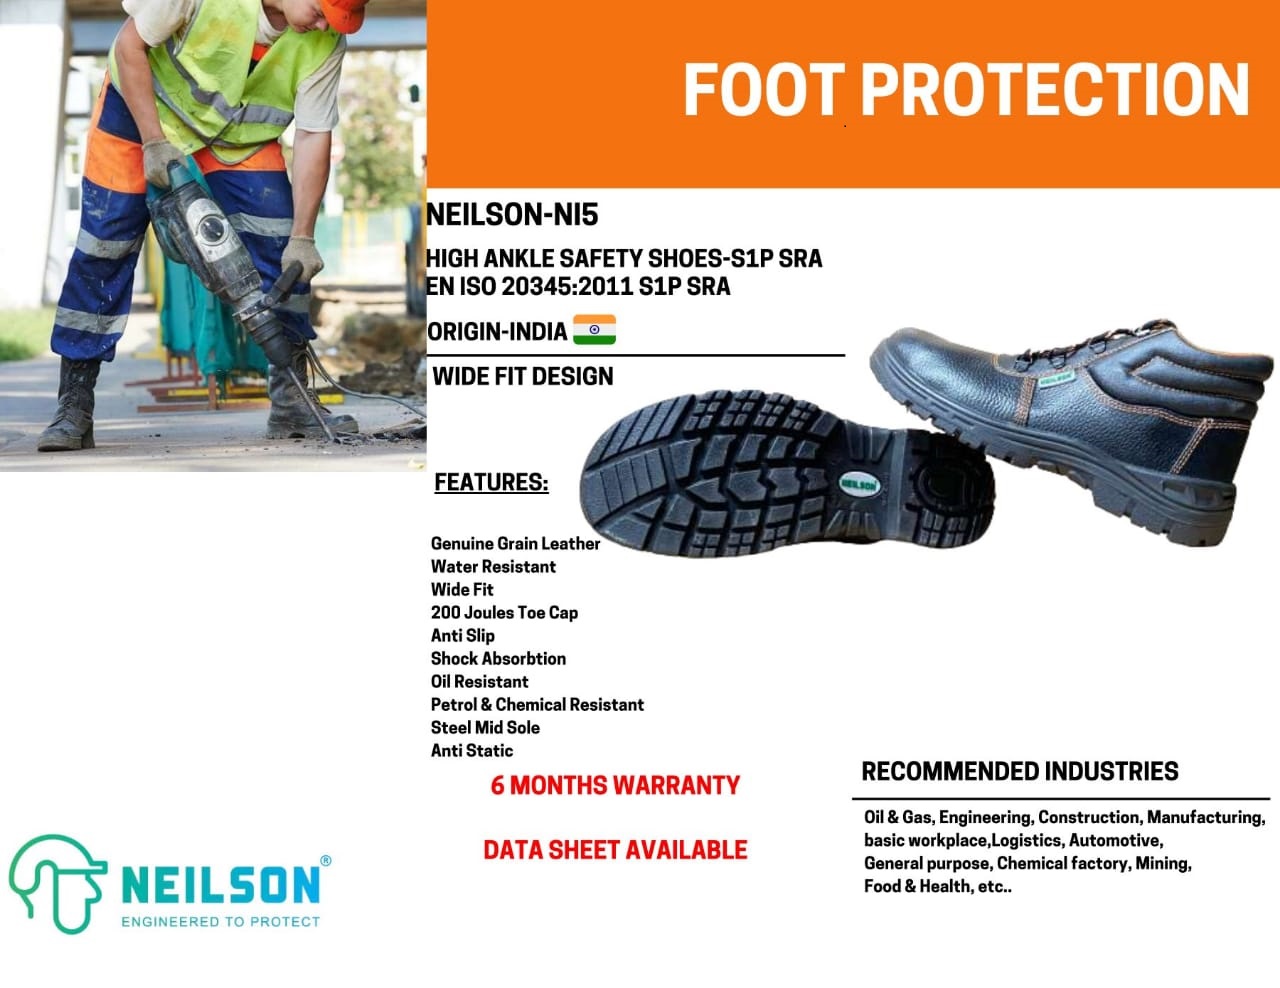 SAFETY SHOES NEILSON NI5